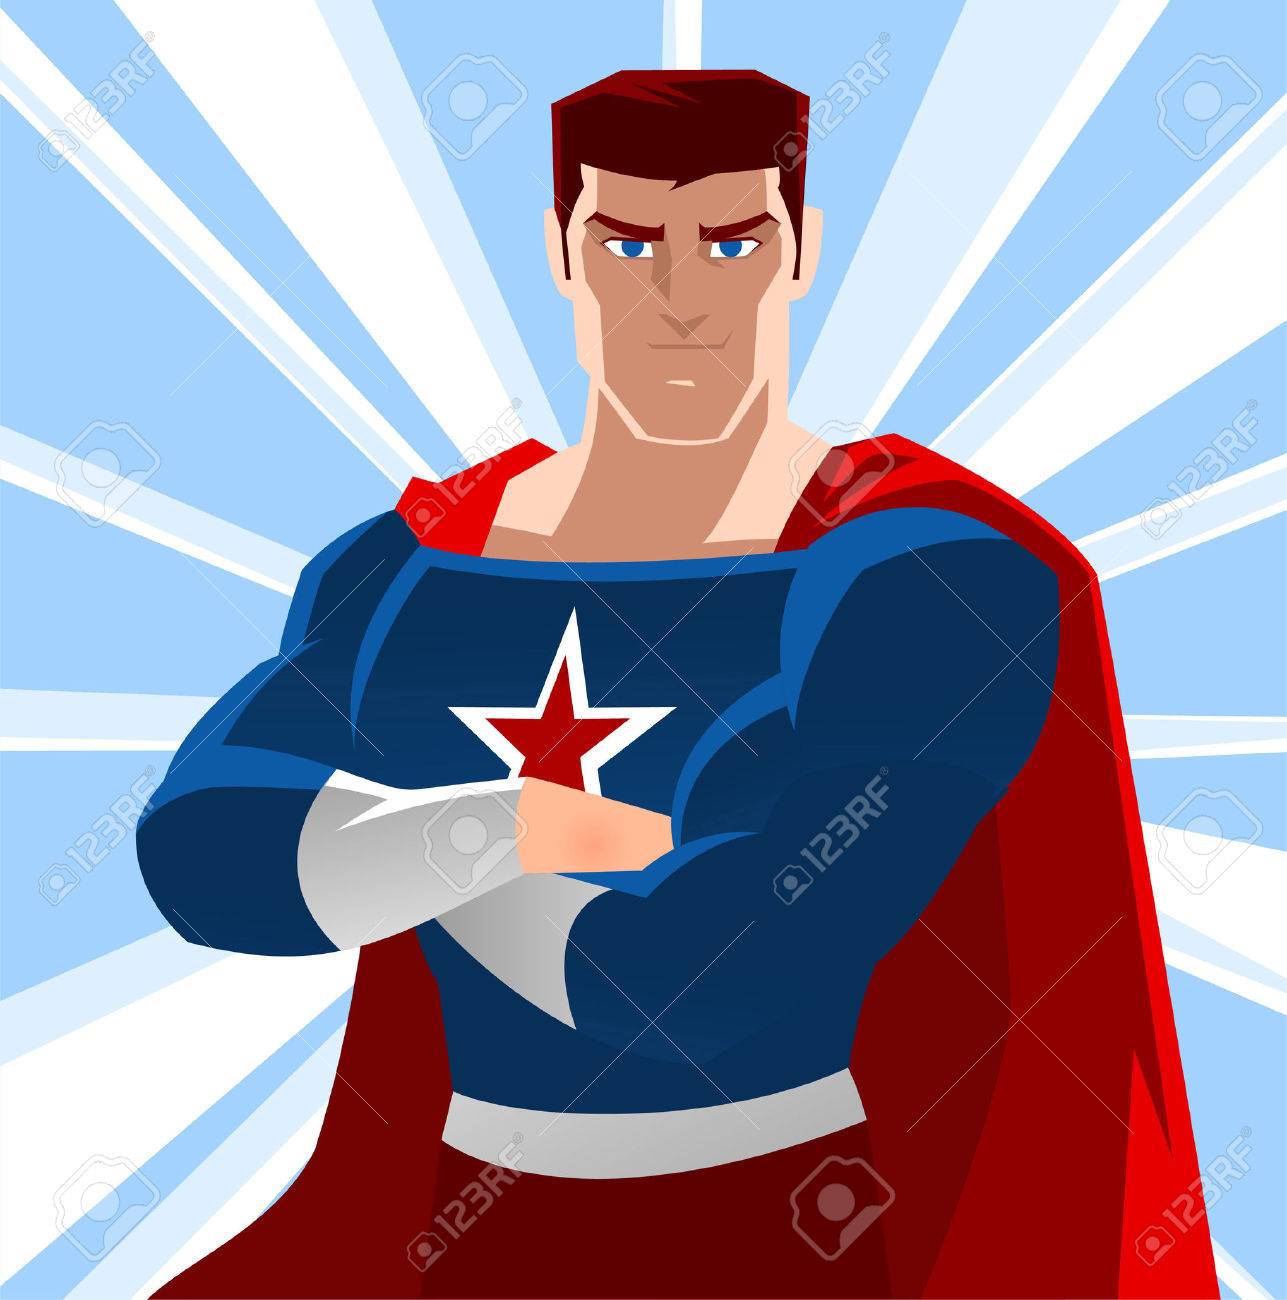 34229779-american-super-hero-with-star-and-red-cape-vector-illustration-.jpg